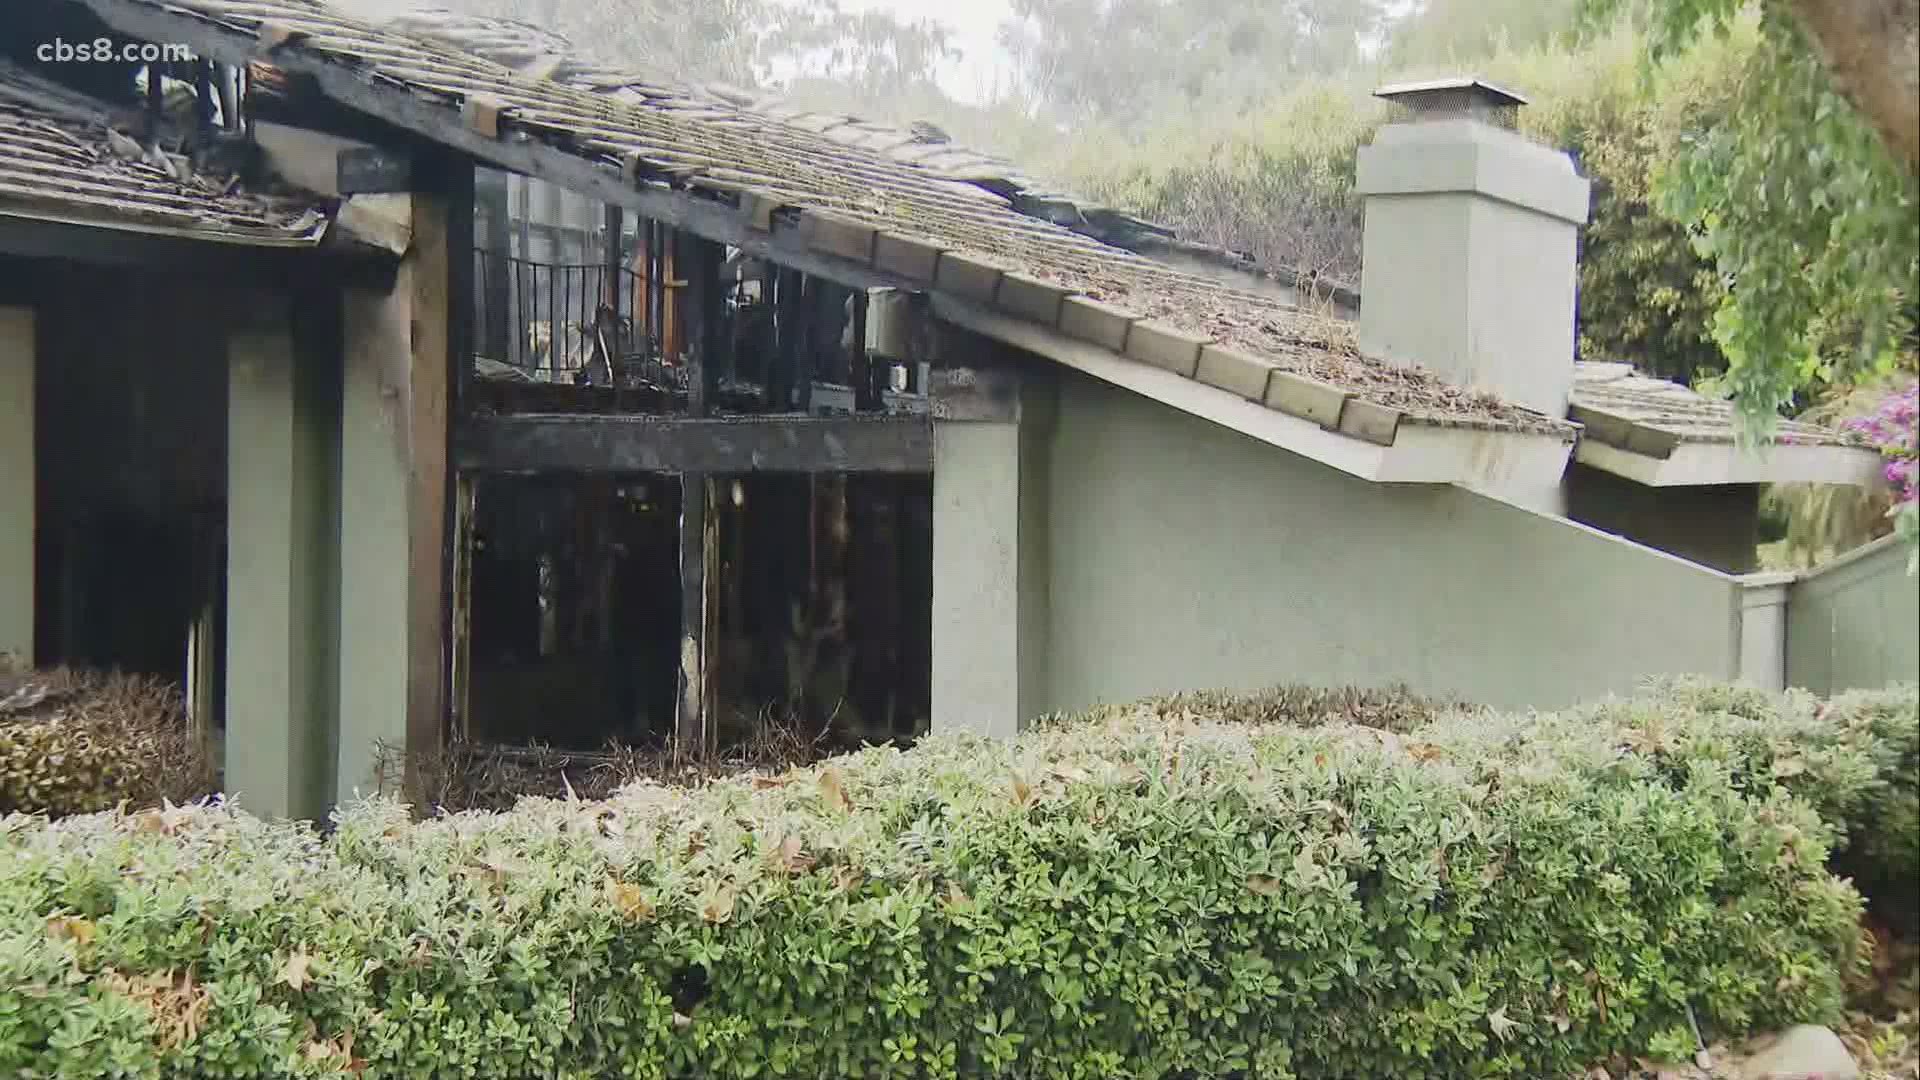 Firefighters arrived at the scene and found smoke and flames coming from the house's second story, according to the San Diego Fire-Rescue Department.